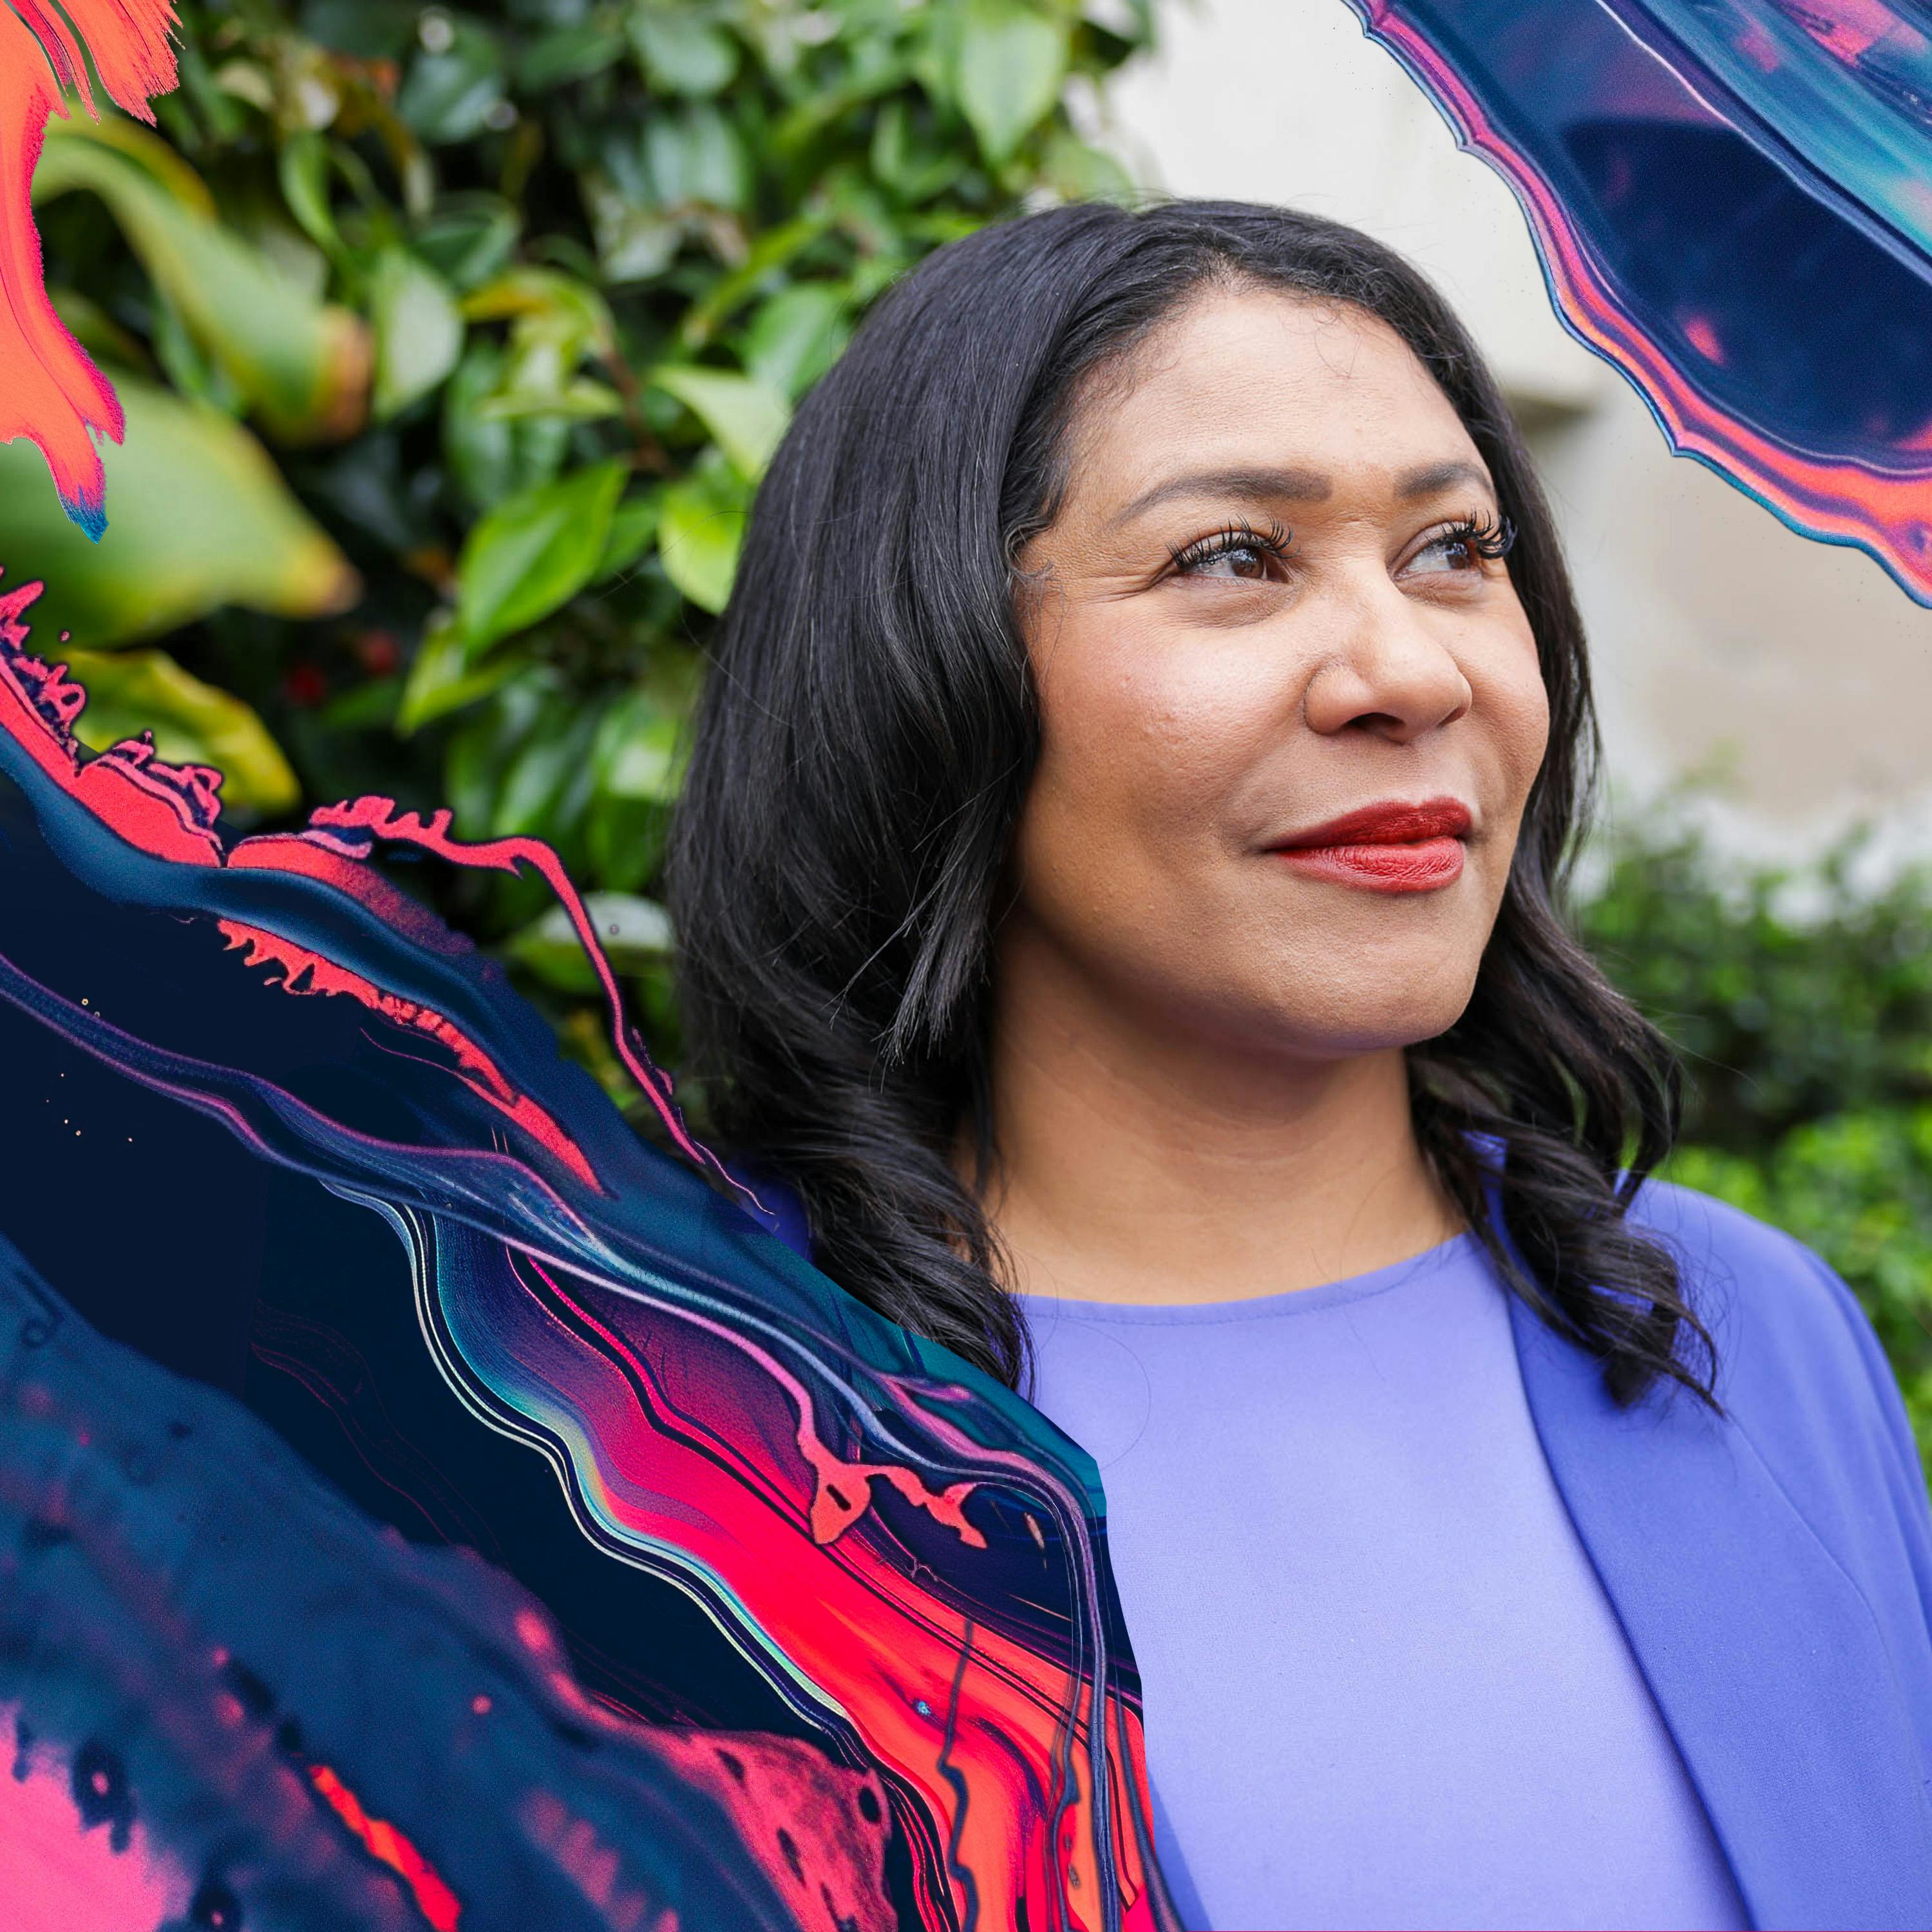 The truth hurts with SF Mayor London Breed